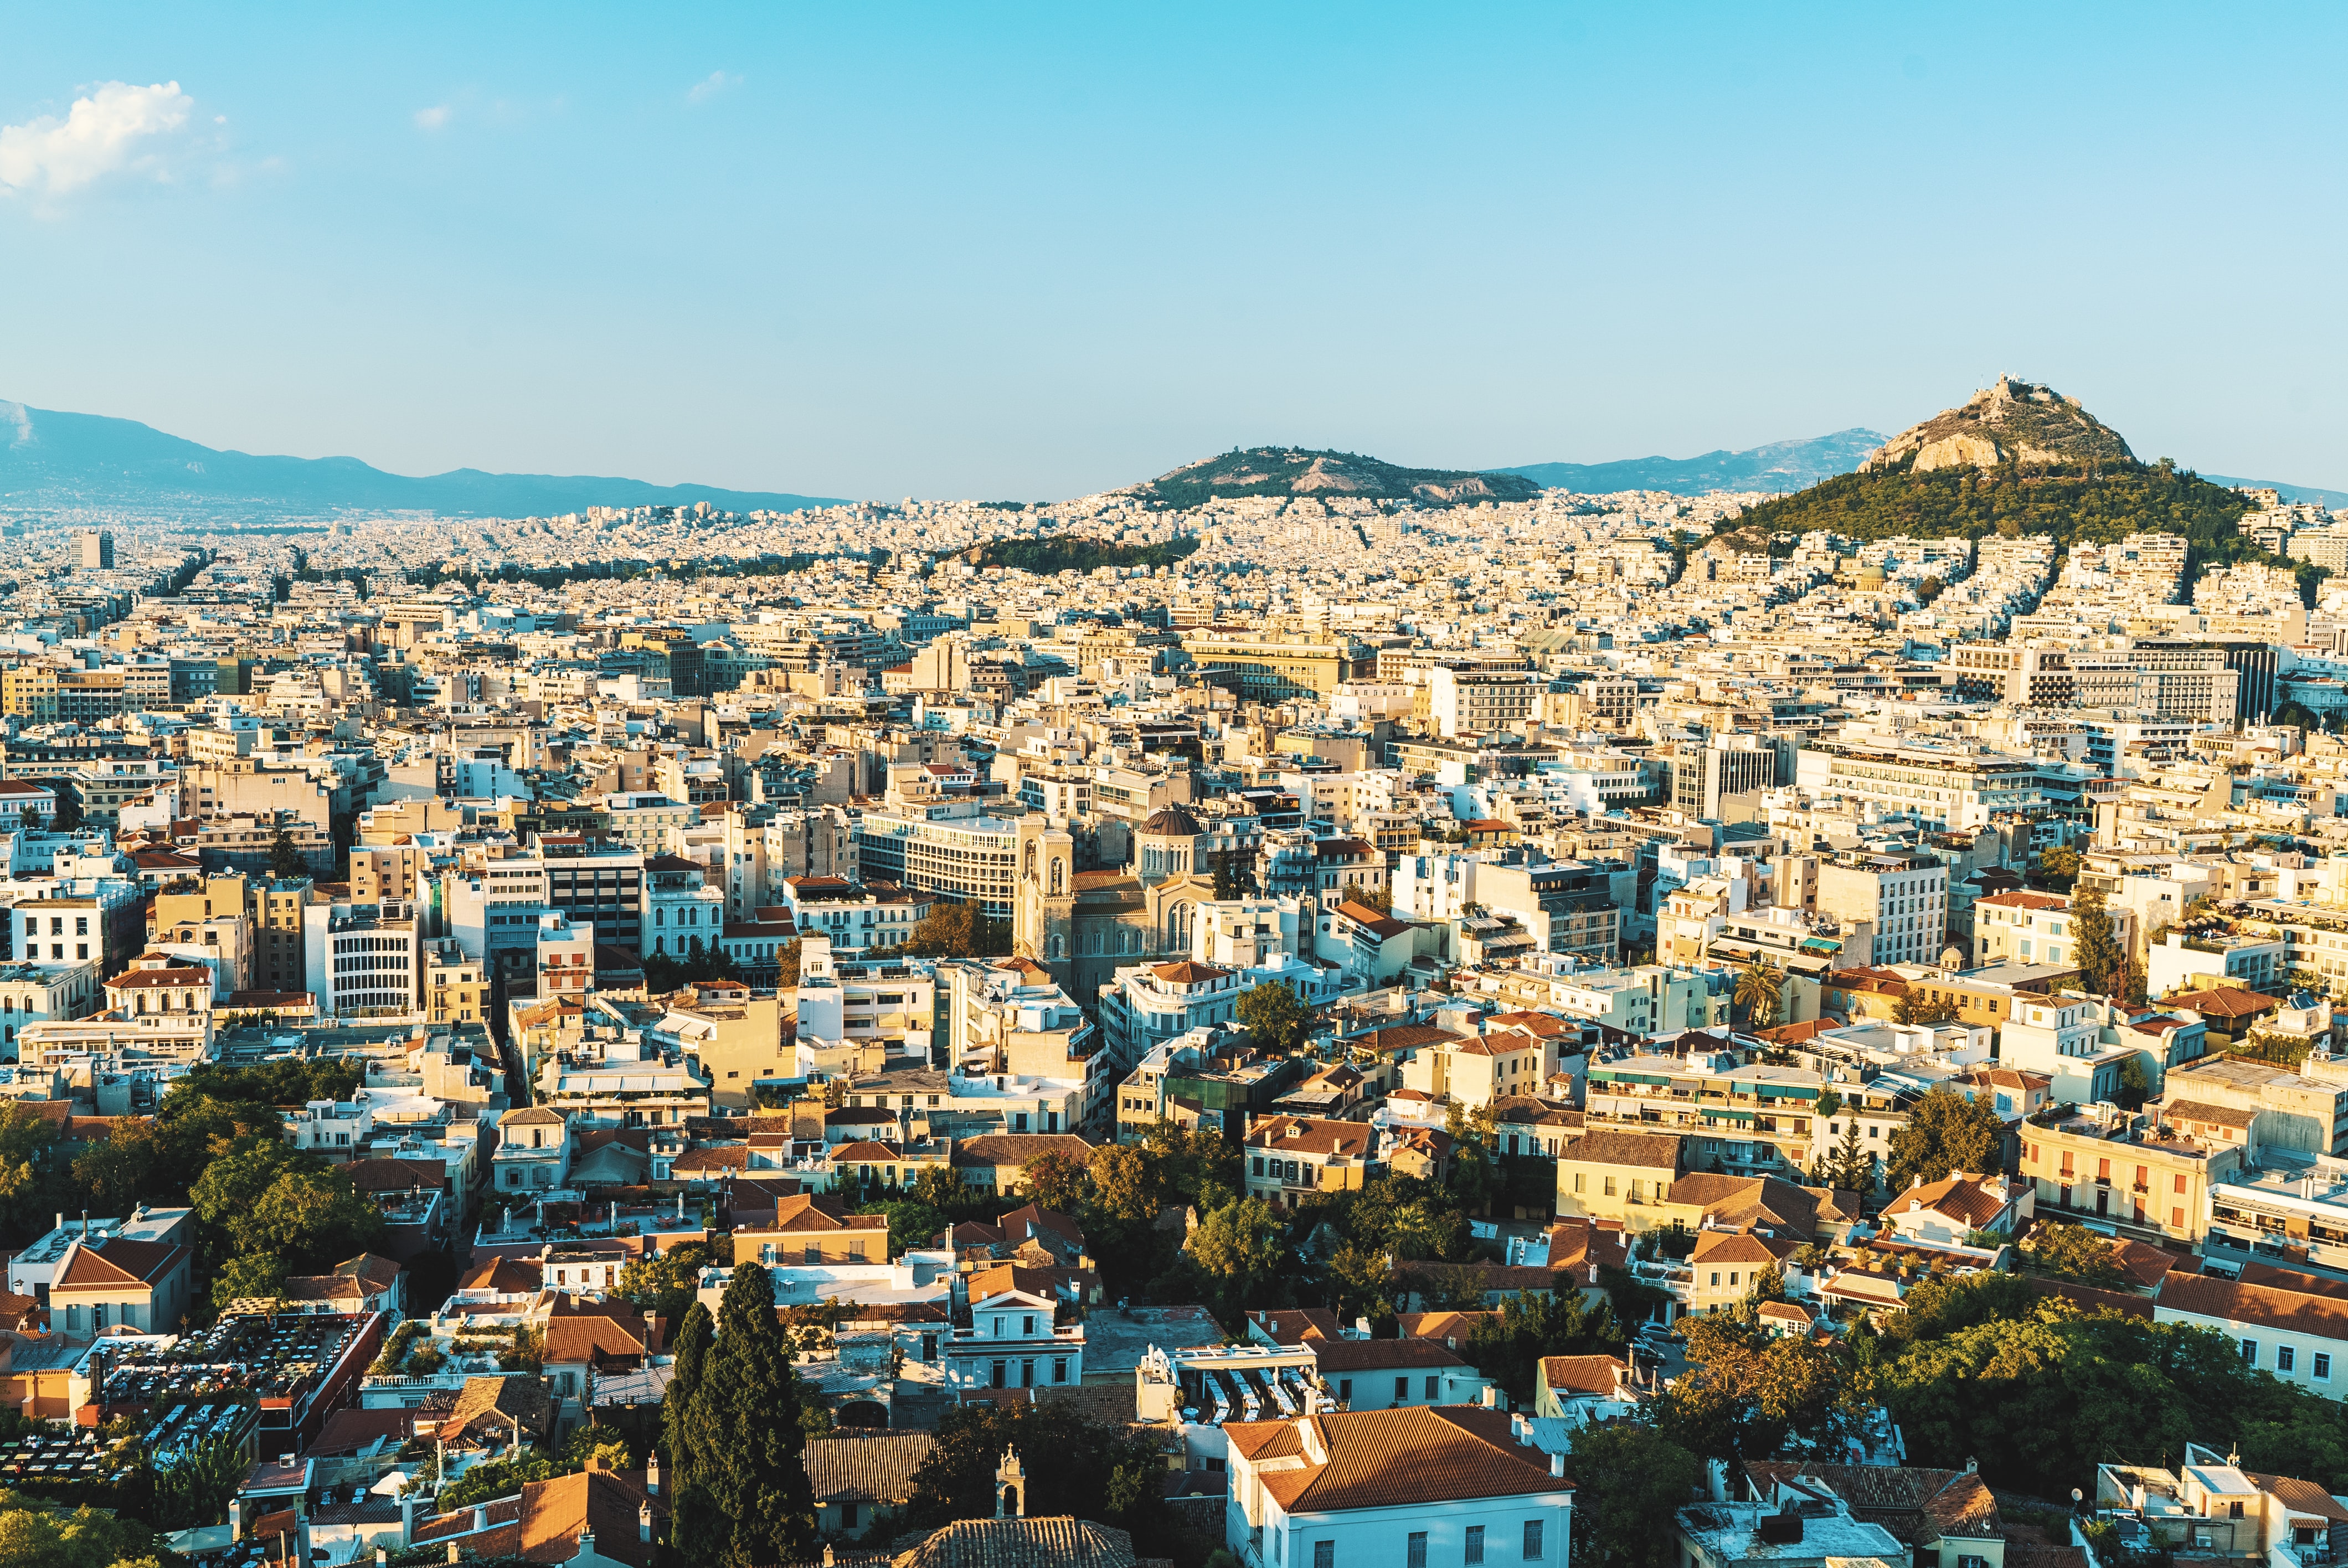 A shot of Athens from above on a clear day